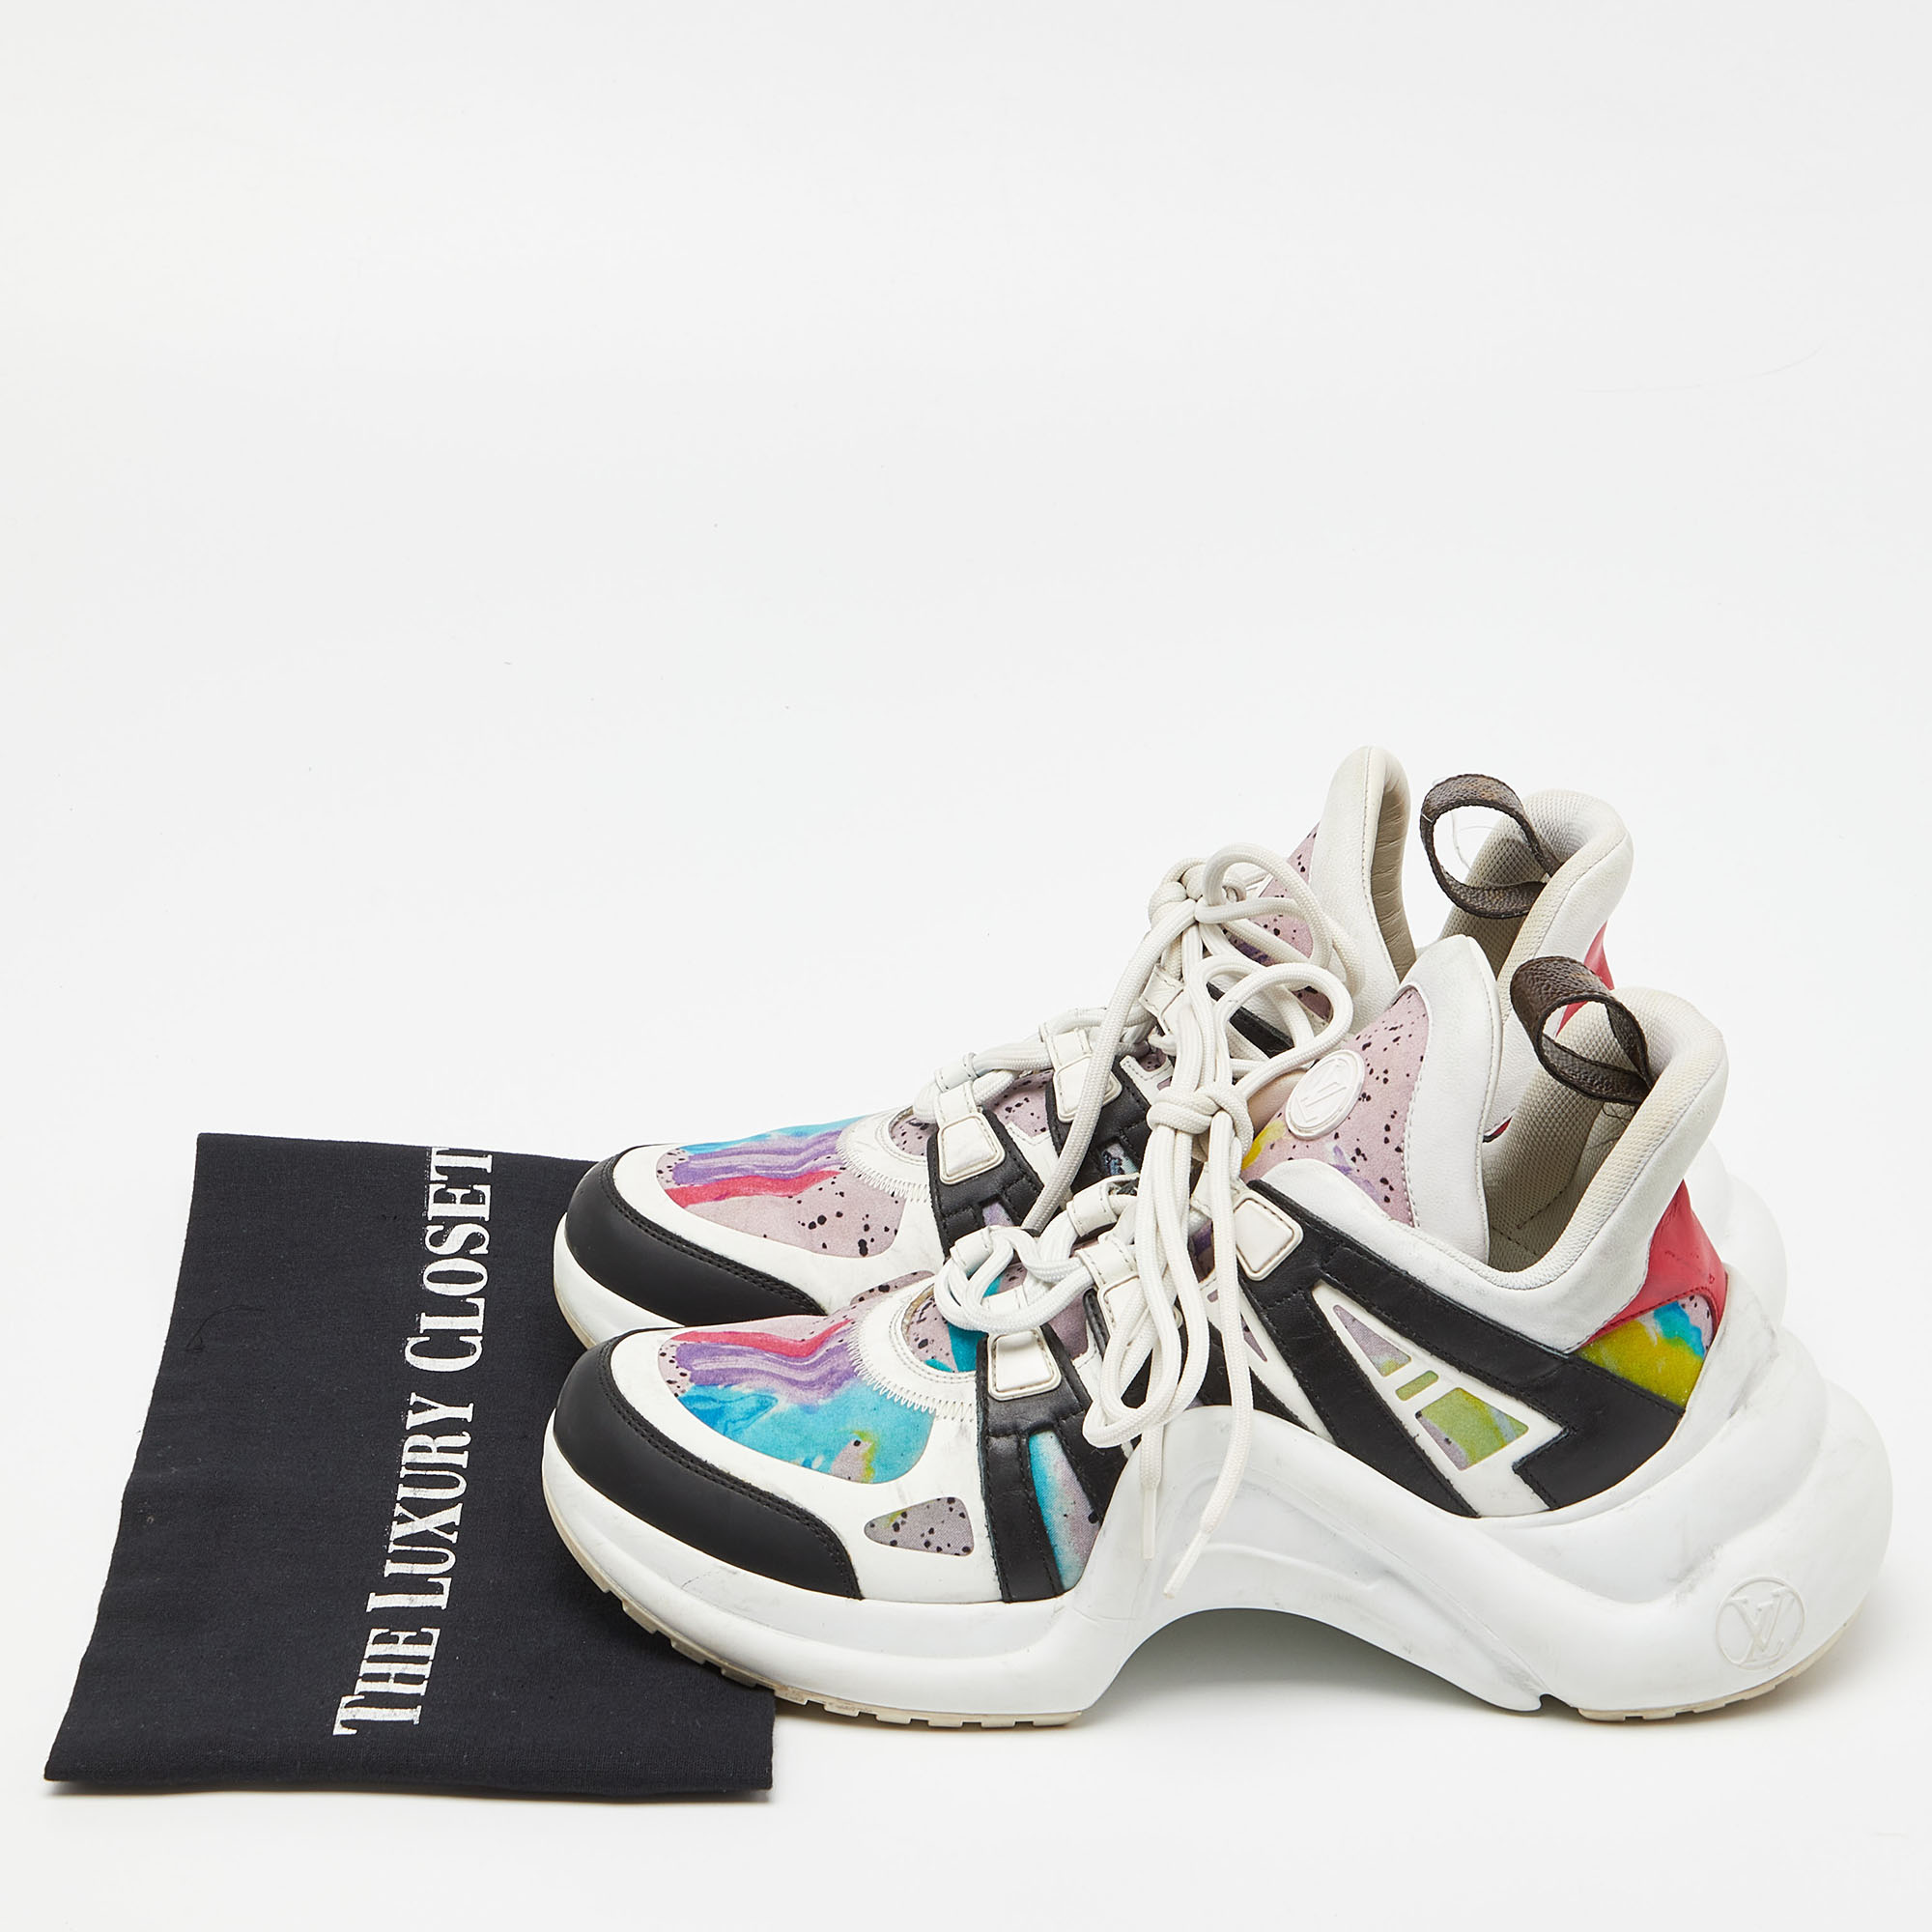 Louis Vuitton Multicolor Nylon And Leather Archlight Sneakers Size 40